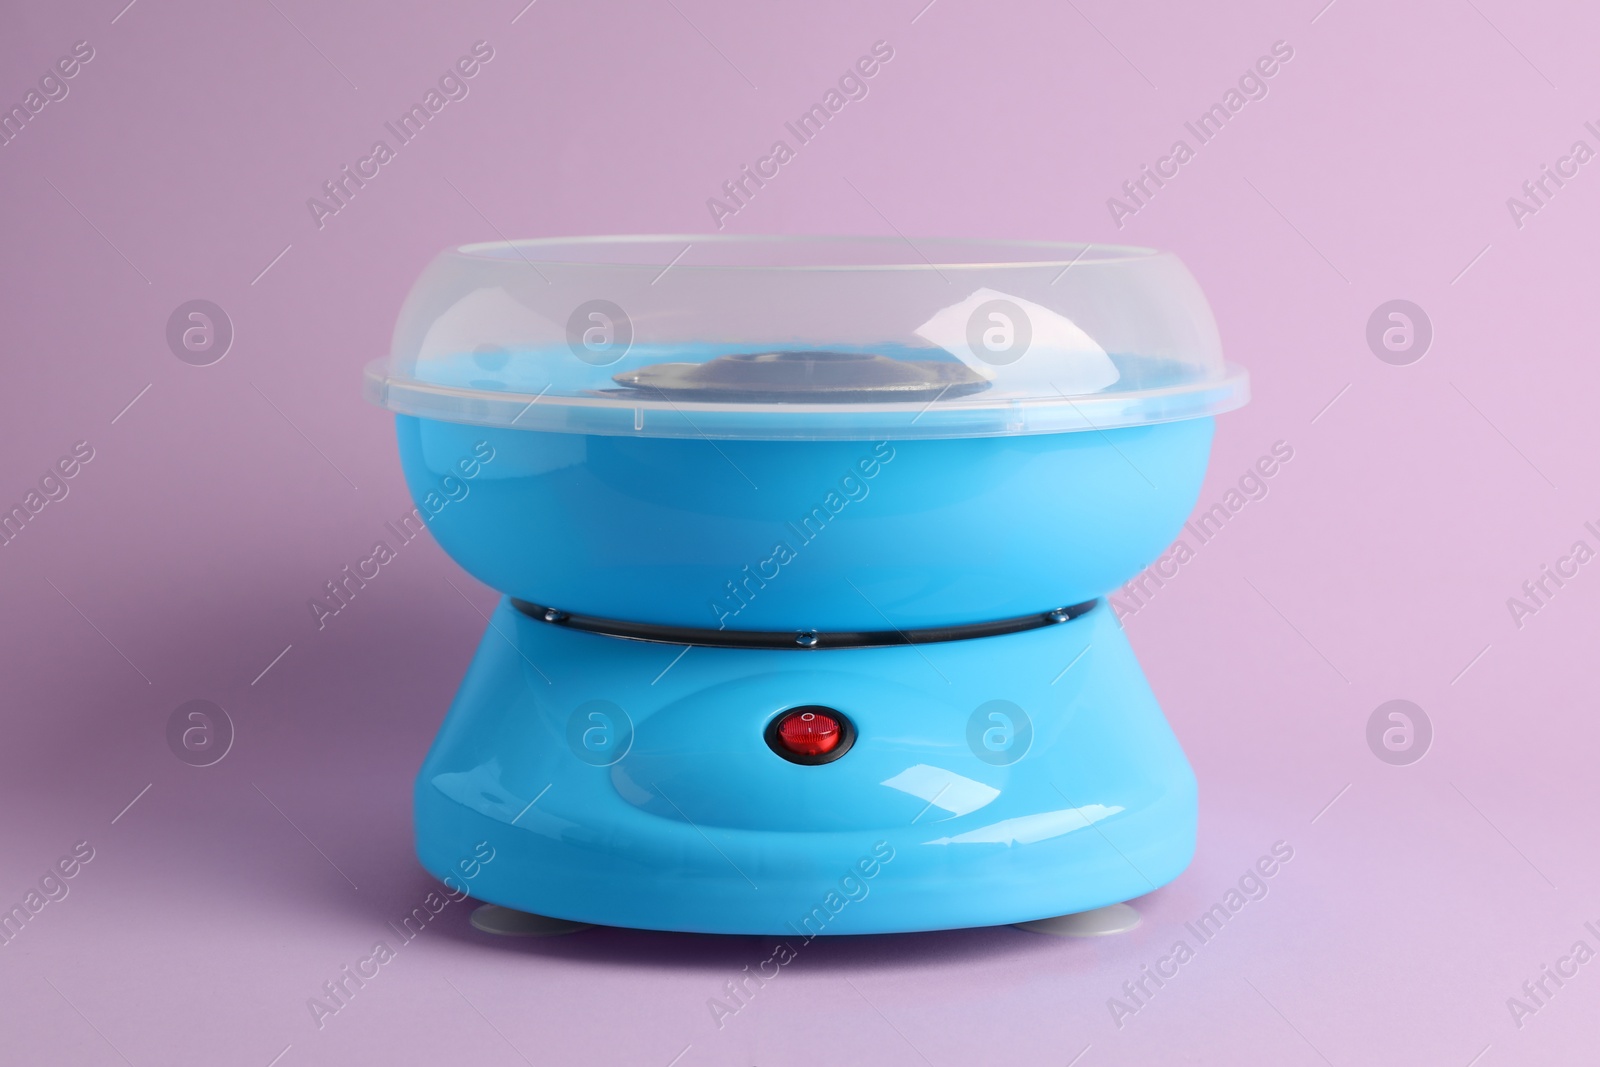 Photo of Portable candy cotton machine on violet background